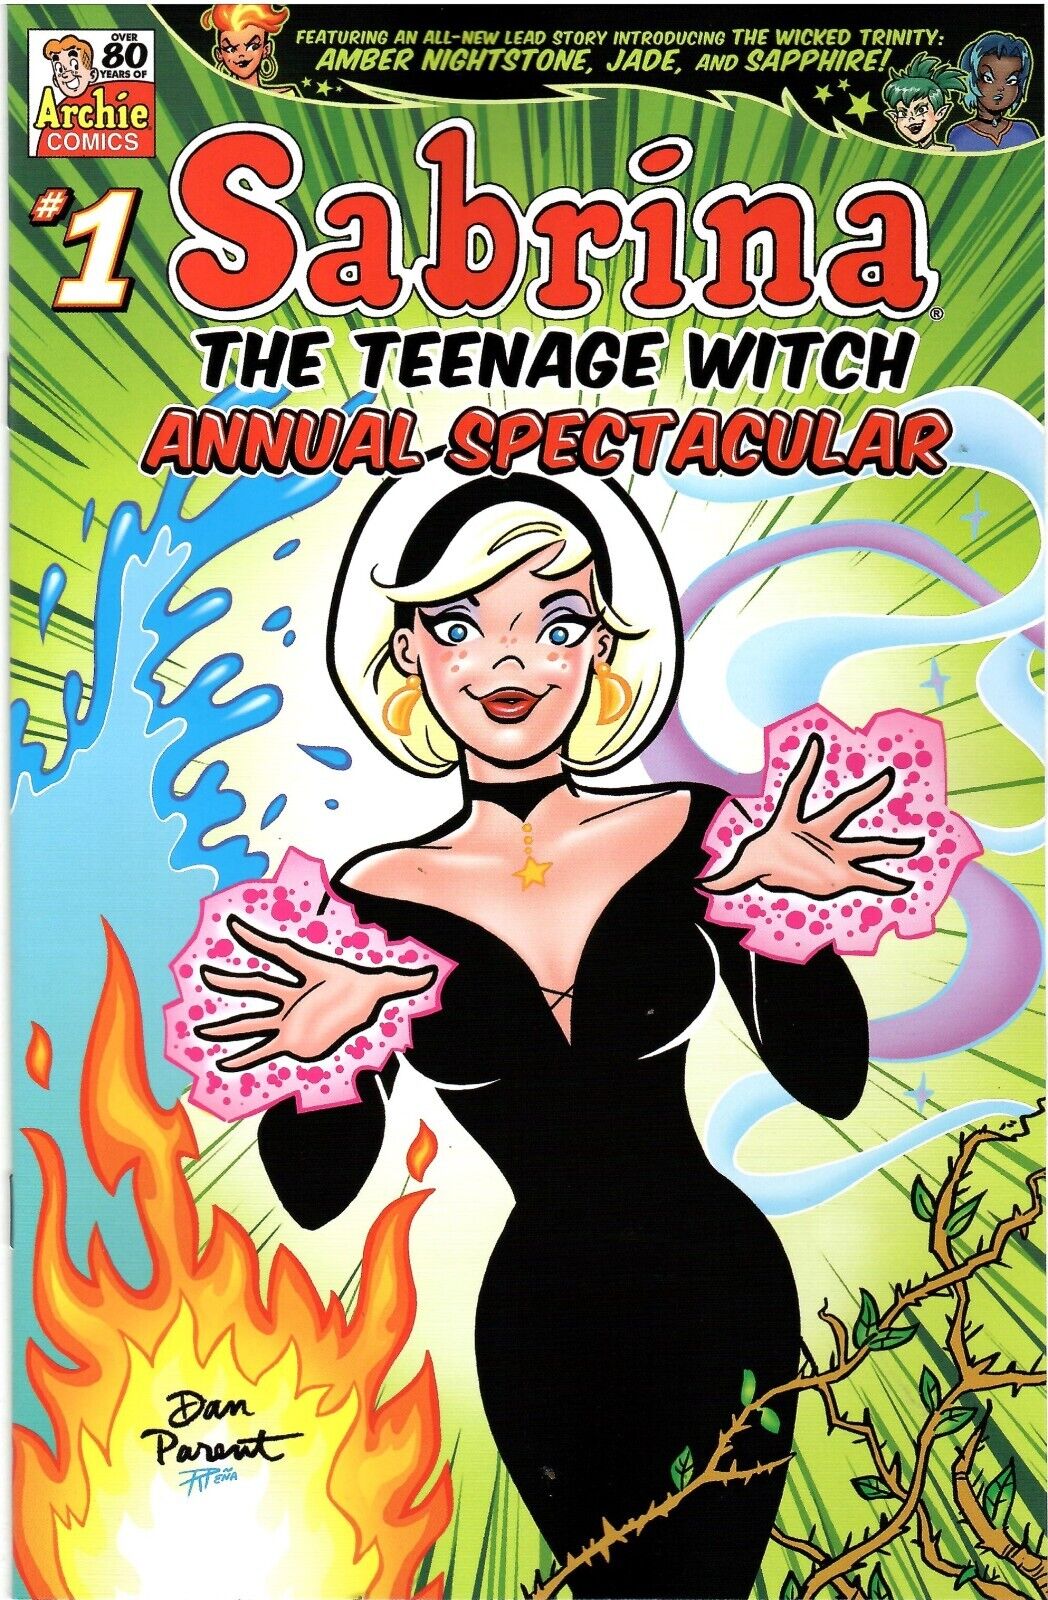 Sabrina the Teenage Witch Annual Spectacular #1 (One Shot) Dan Parent Cover NM-